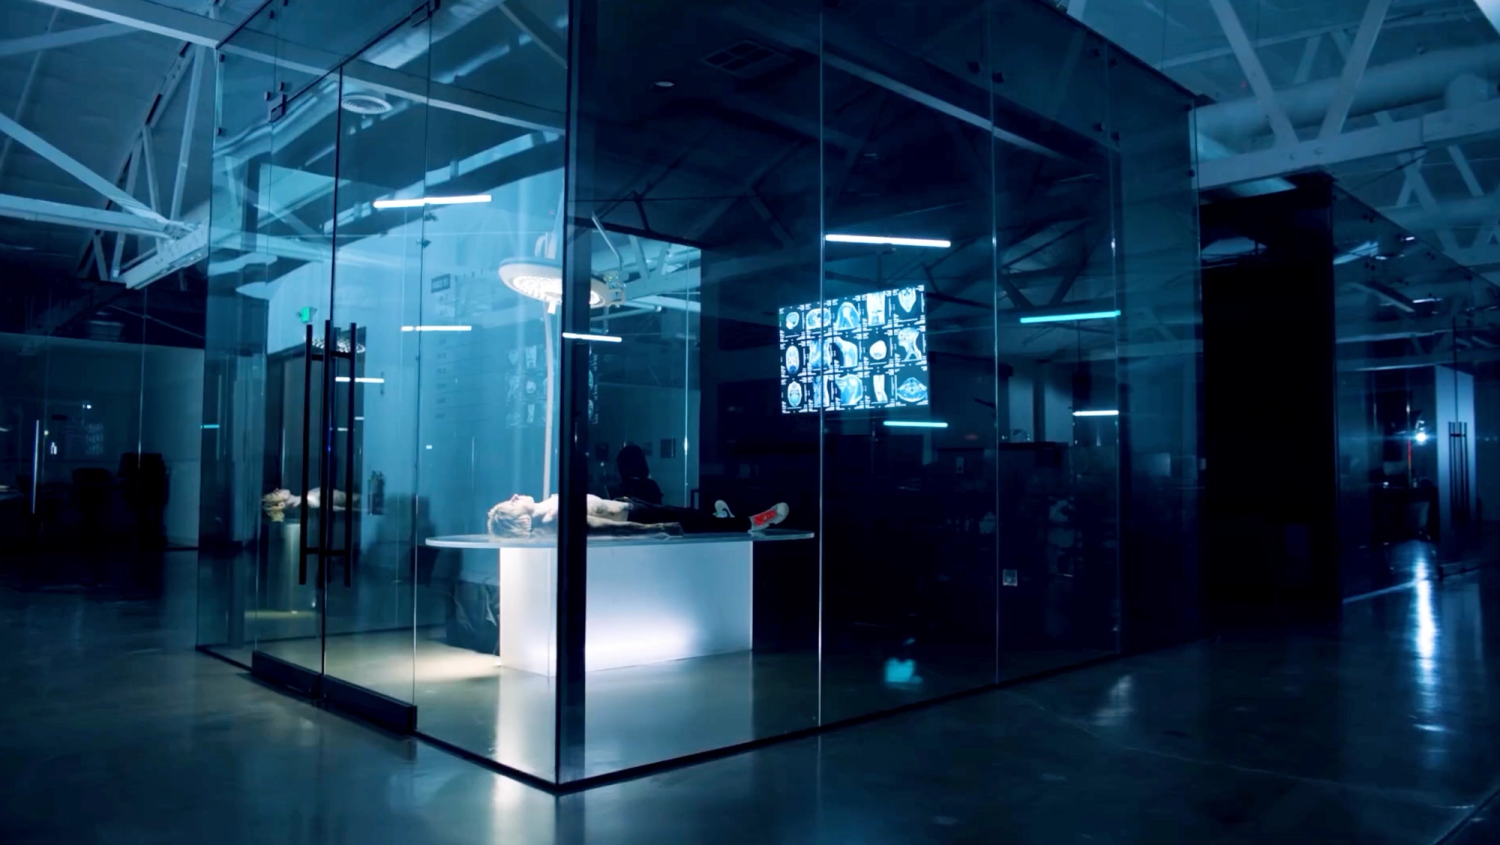 A cube space used as futuristic medical room with a person lying on a table and X-ray images displayed on screens in a dark, blue-lit environment.